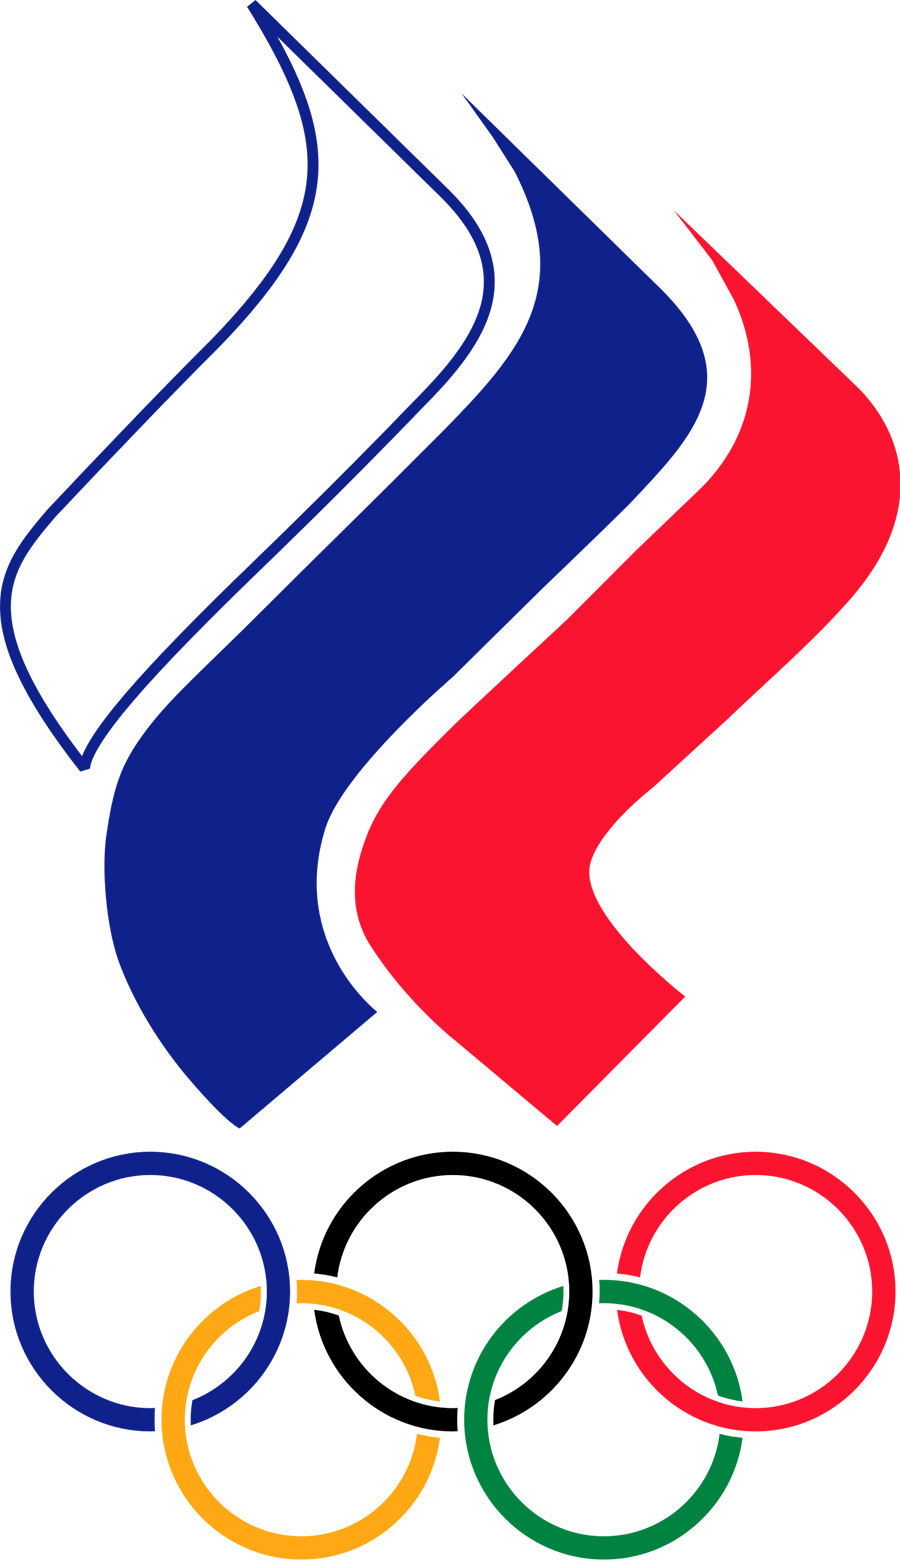 The emblem of the Russian Olympic Committee